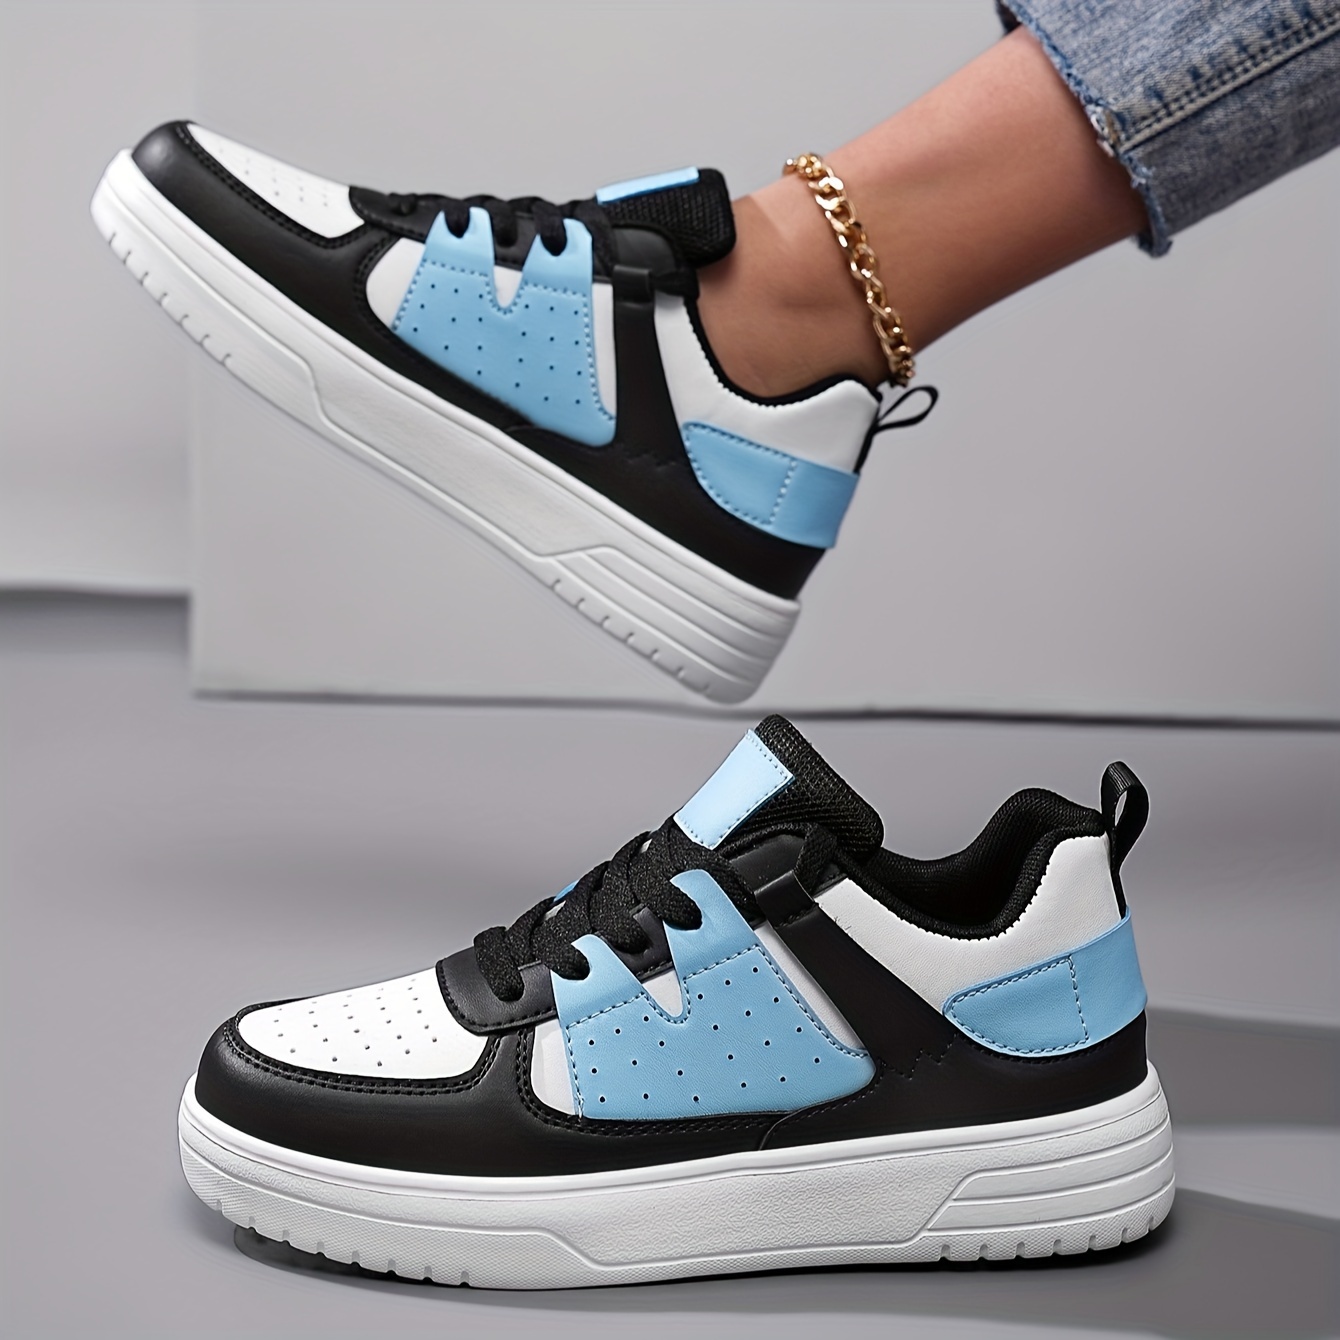 

Women's Colorblock Casual Sneakers, Lace Up Platform Soft Sole Walking Skate Shoes, Low-top Comfort Running Trainers